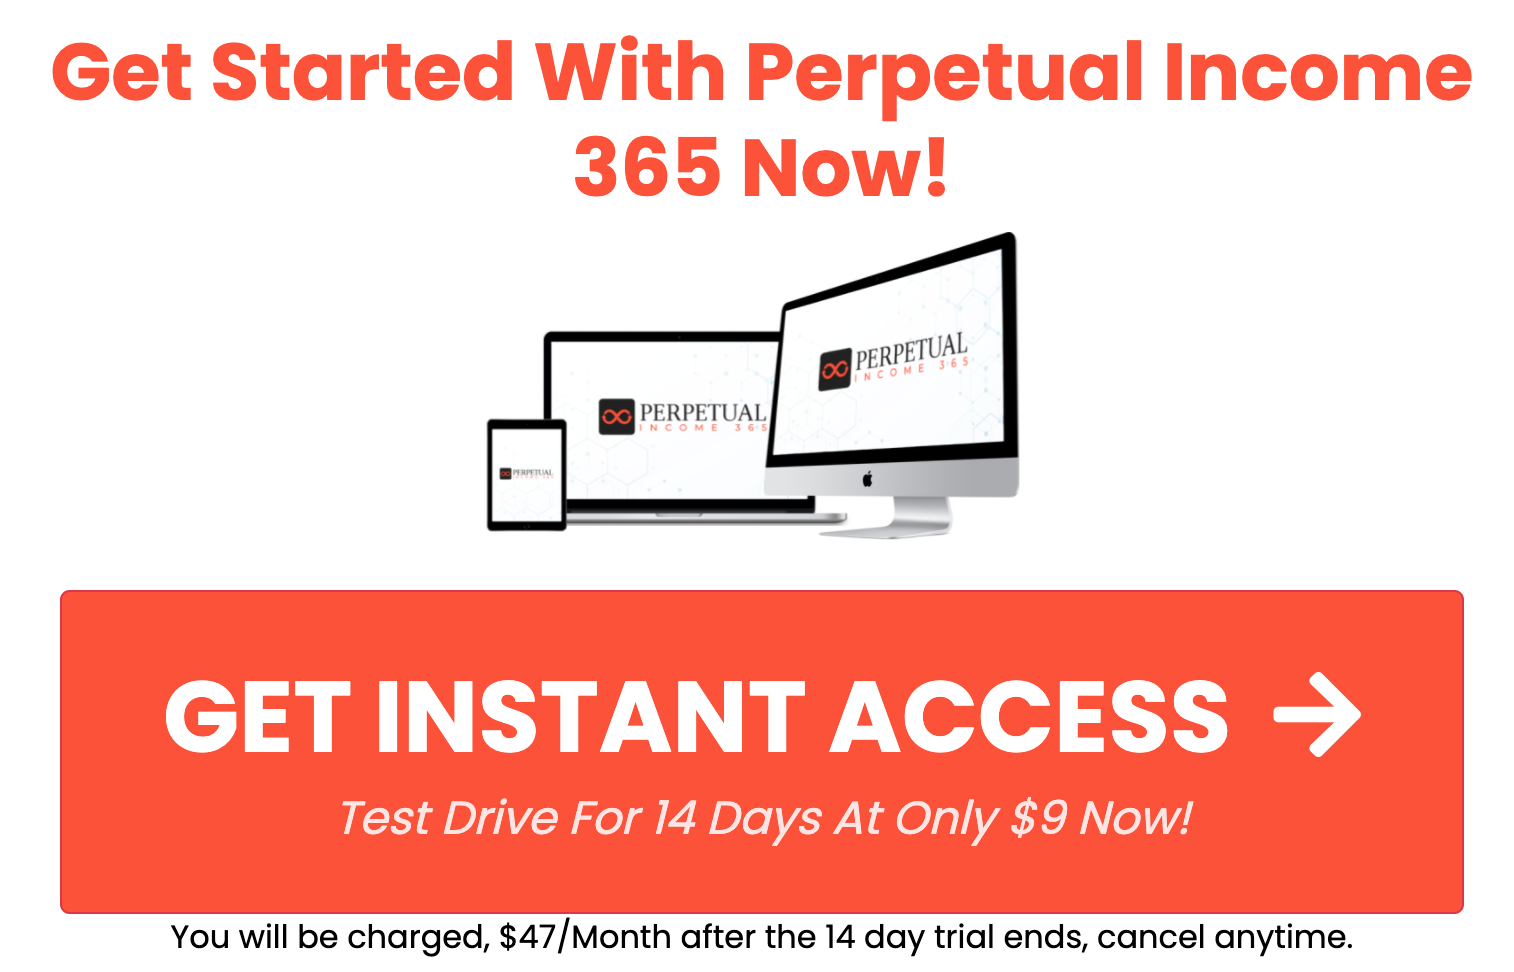 what is Perpetual Income 365 about